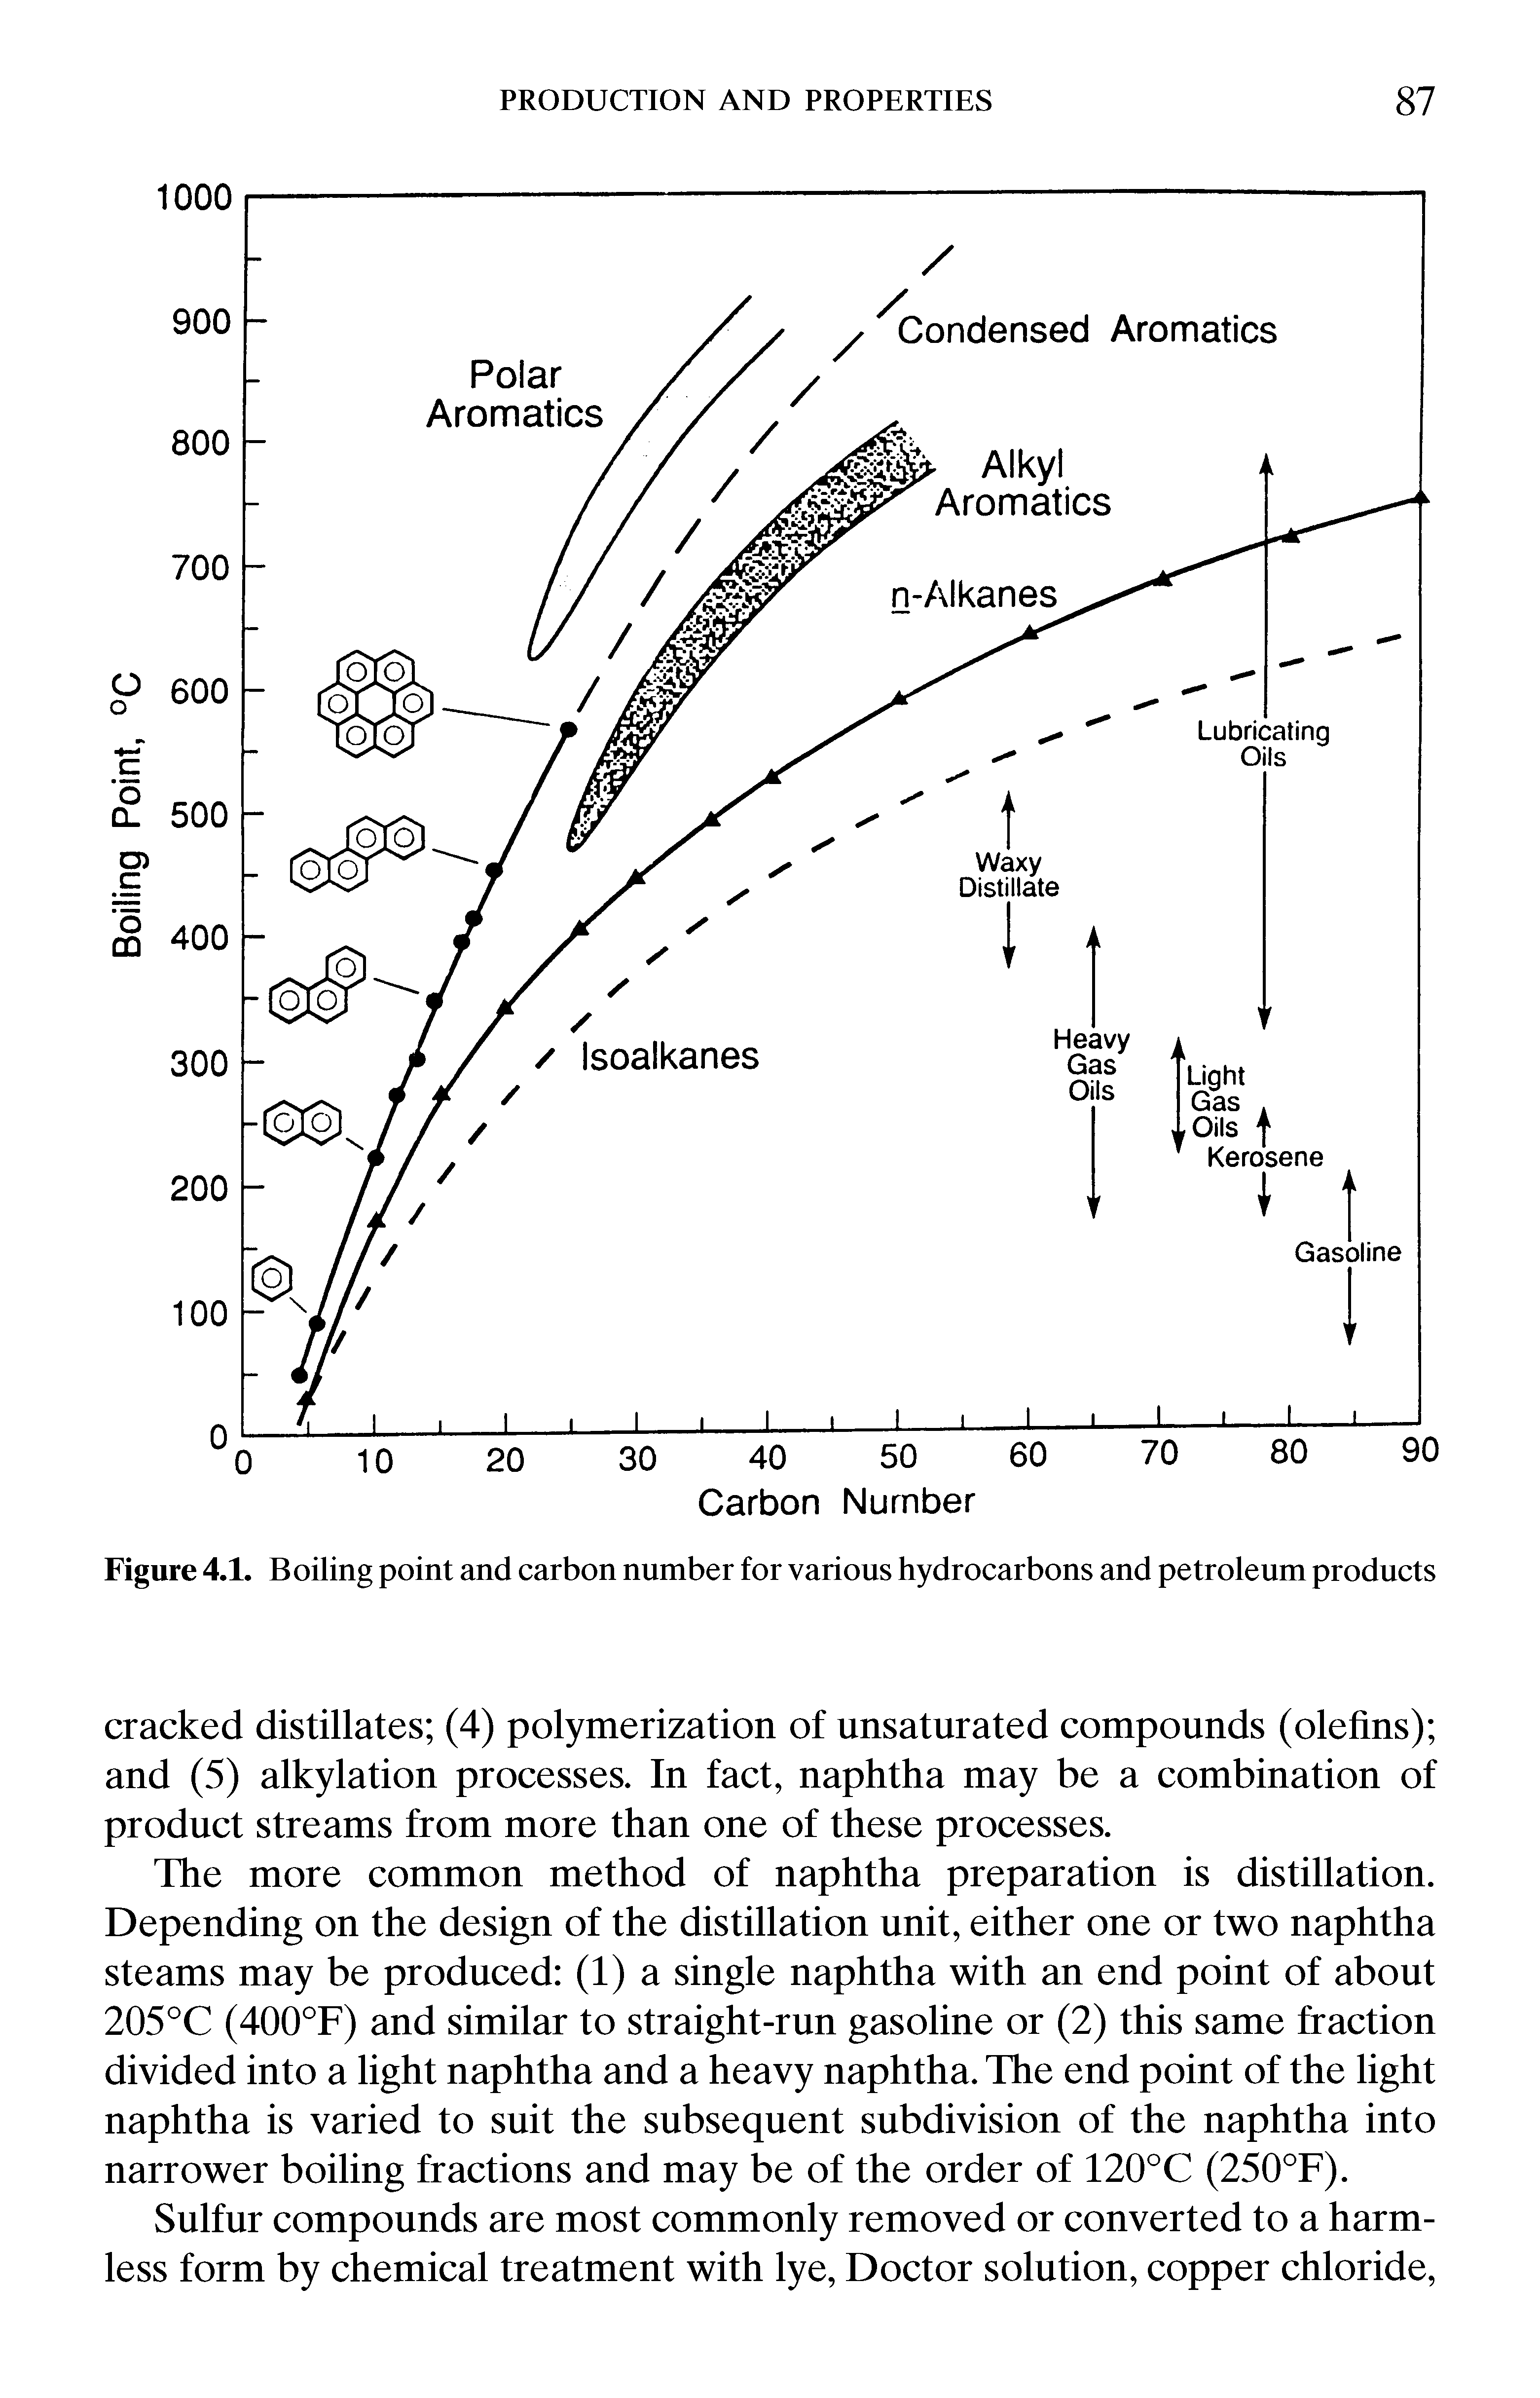 Figure 4.1. Boiling point and carbon number for various hydrocarbons and petroleum products...